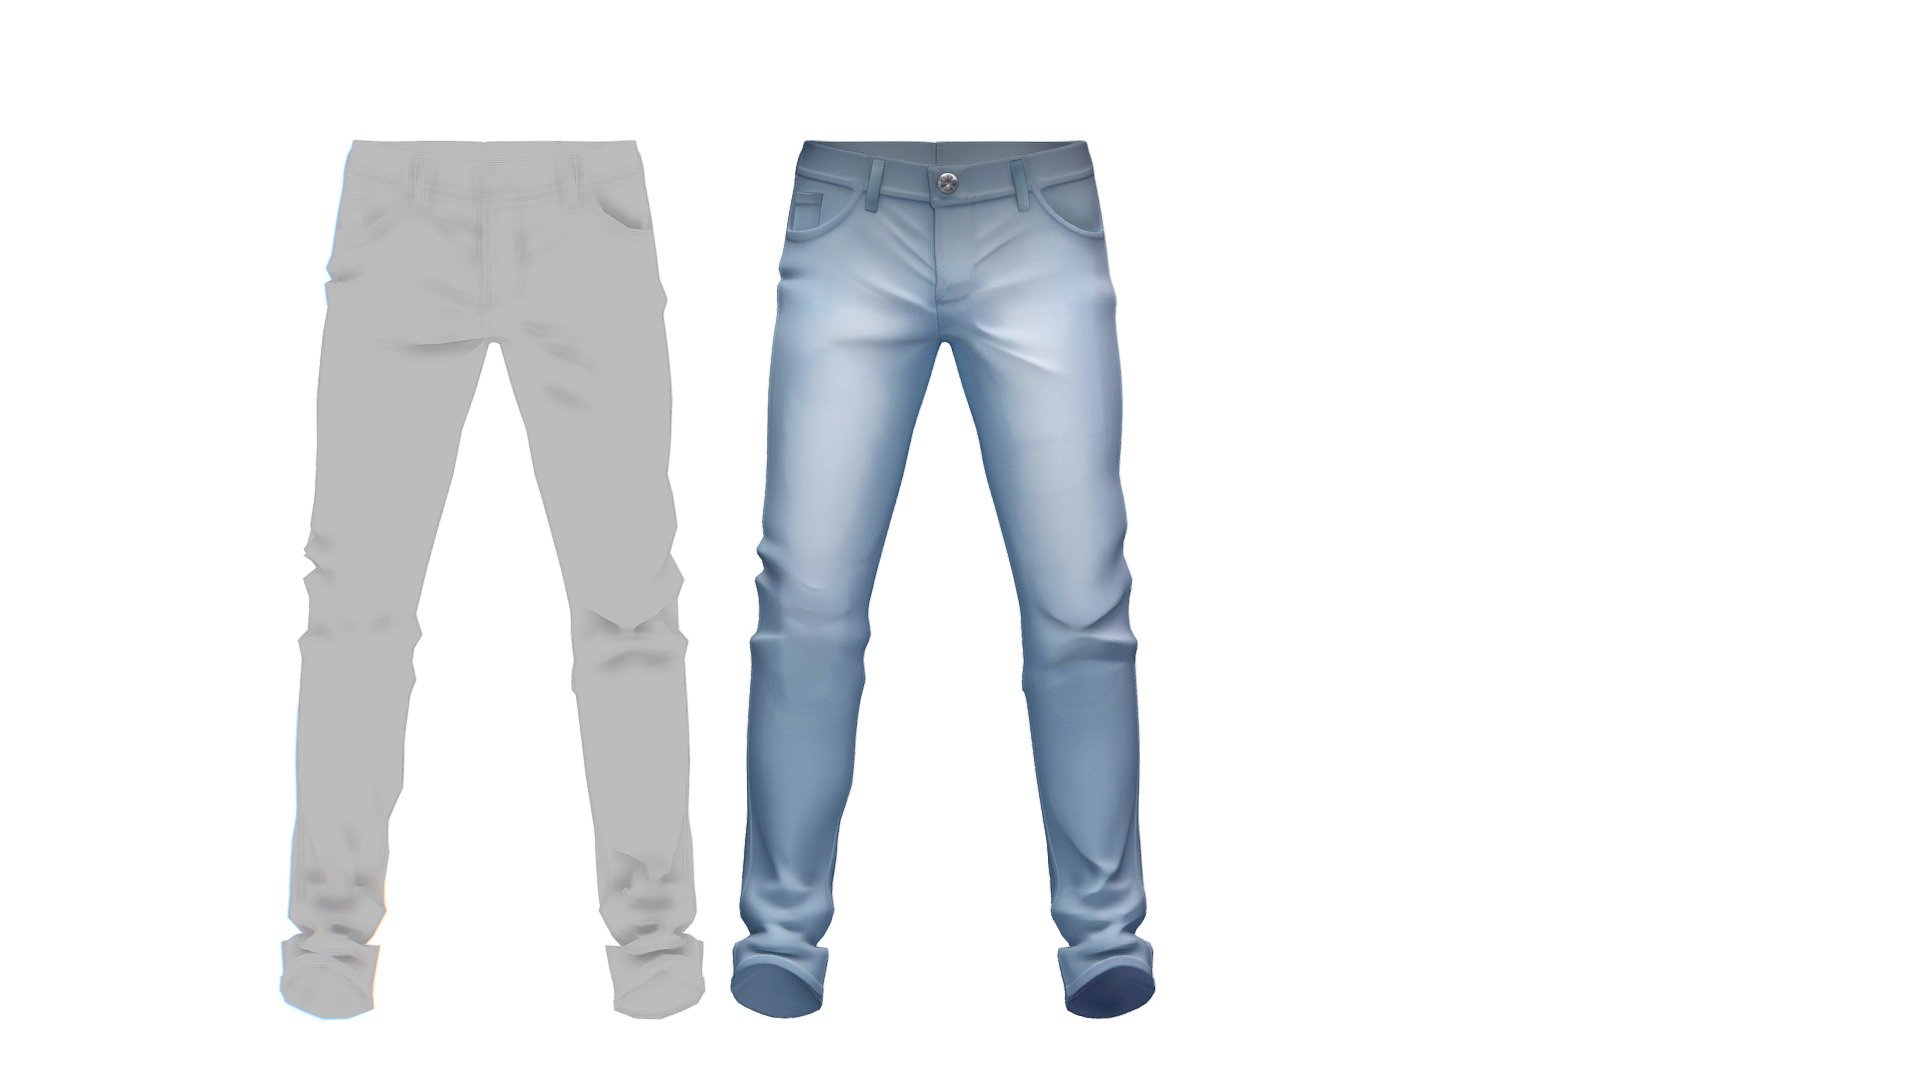 Cartoon High Poly Subdivision Blue Jeans 010

No HDRI map, No Light, No material settings - only Diffuse/Color Map Texture (2700x2700) 

More information about the 3D model: please use the Sketchfab Model Inspector - Key (i) - Cartoon High Poly Subdivision Blue Jeans 010 - Buy Royalty Free 3D model by Oleg Shuldiakov (@olegshuldiakov) 3d model